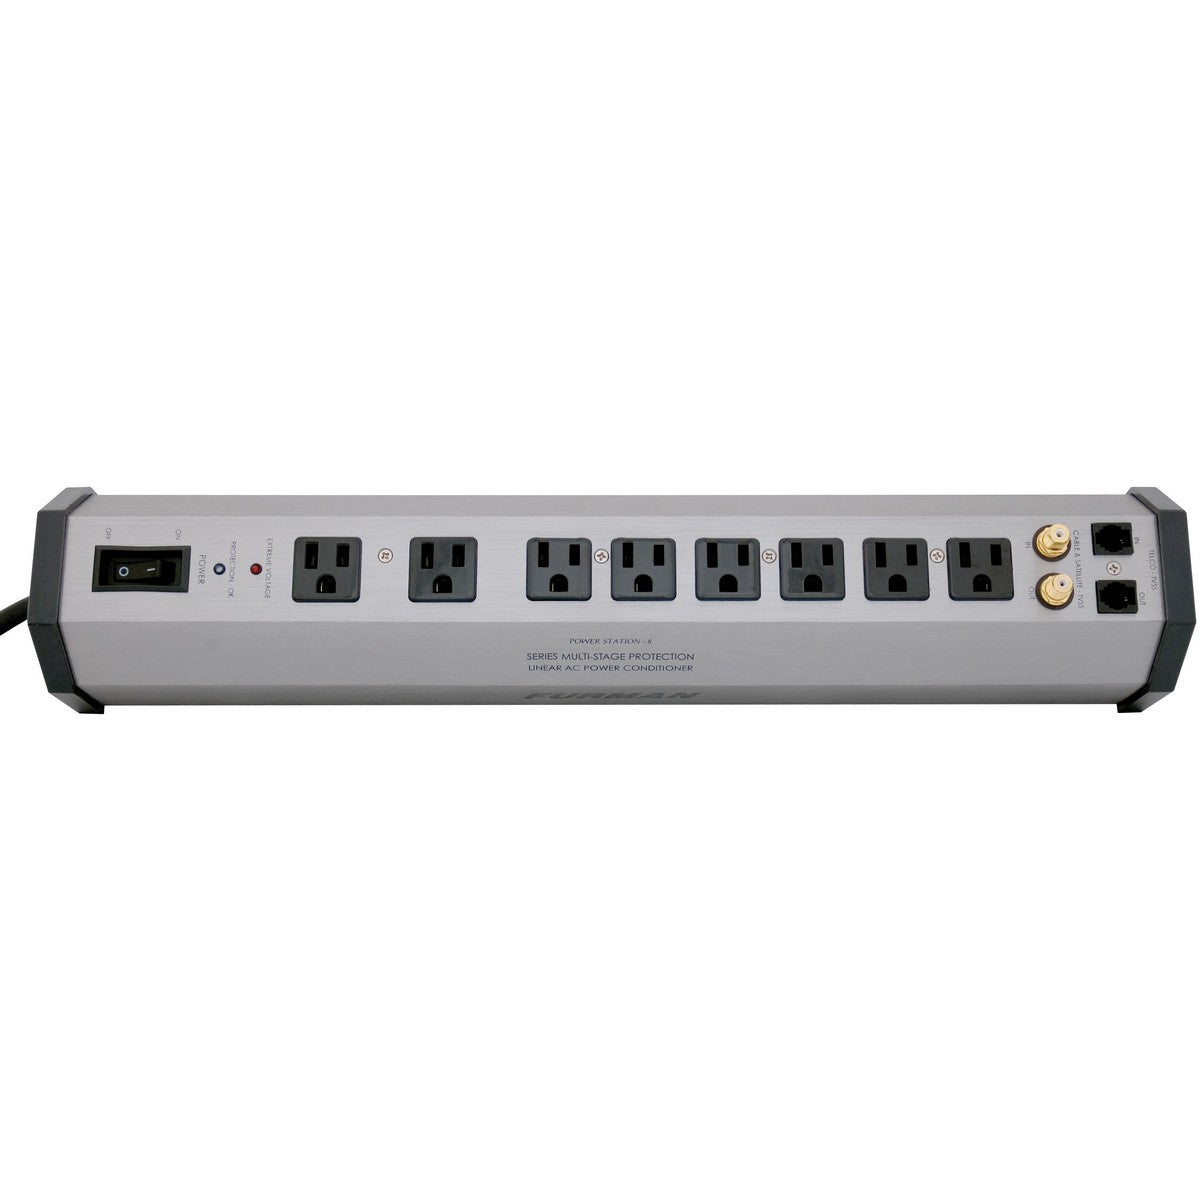 Furman PST-8 | 15A Advanced AC Strip 8 Outlets with SMP and EVS 15A 8 Feet Cord exceeds UL1449 Standard